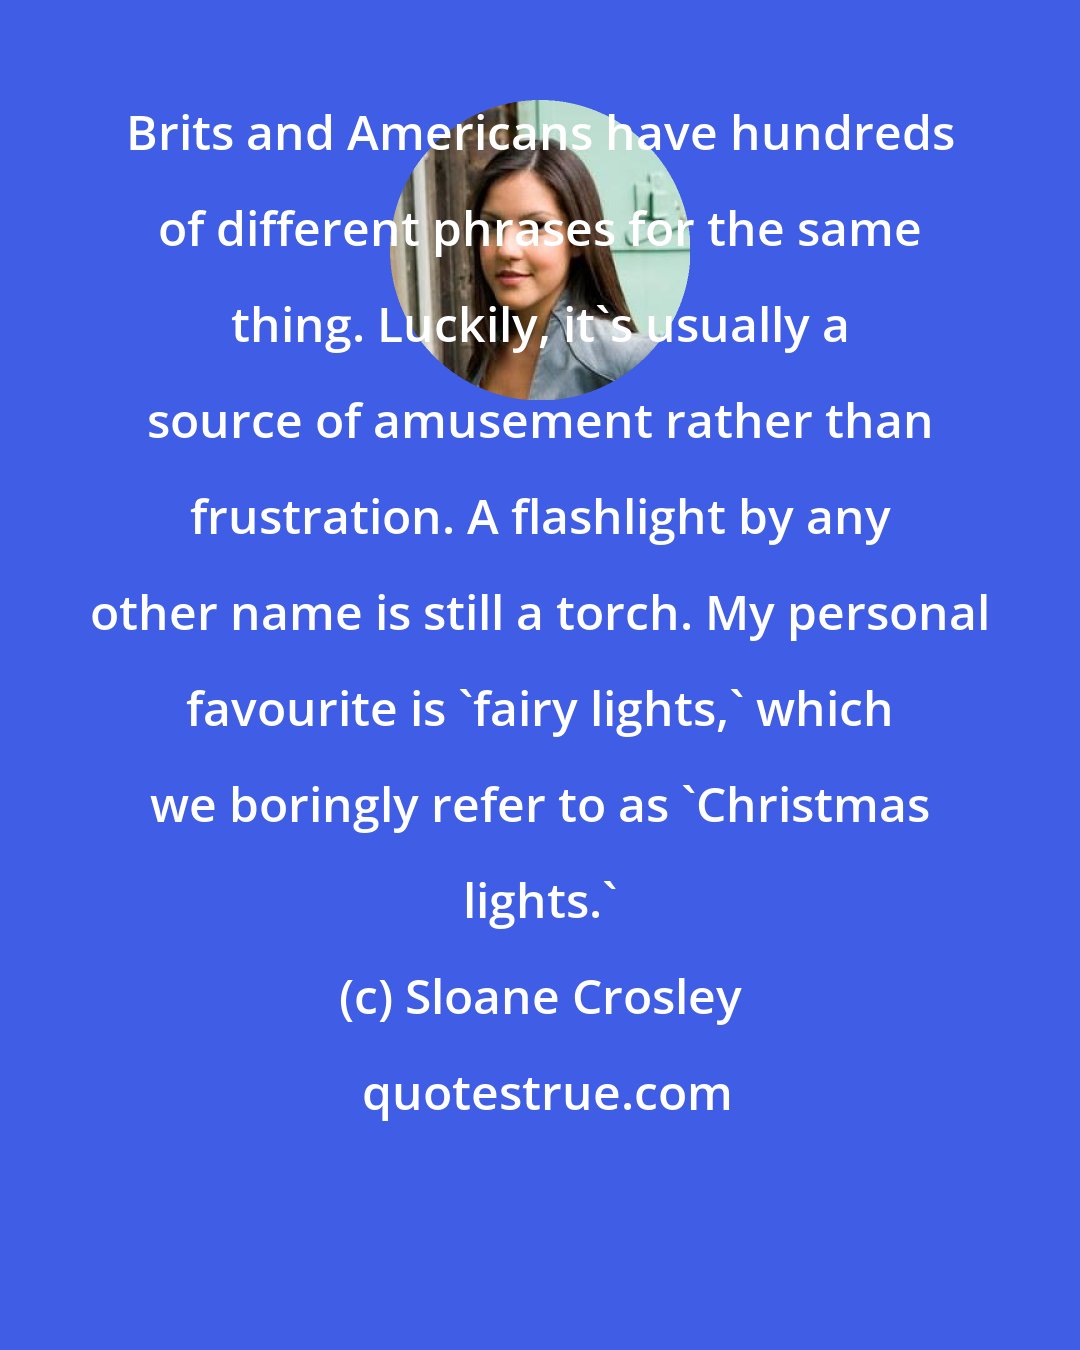 Sloane Crosley: Brits and Americans have hundreds of different phrases for the same thing. Luckily, it's usually a source of amusement rather than frustration. A flashlight by any other name is still a torch. My personal favourite is 'fairy lights,' which we boringly refer to as 'Christmas lights.'